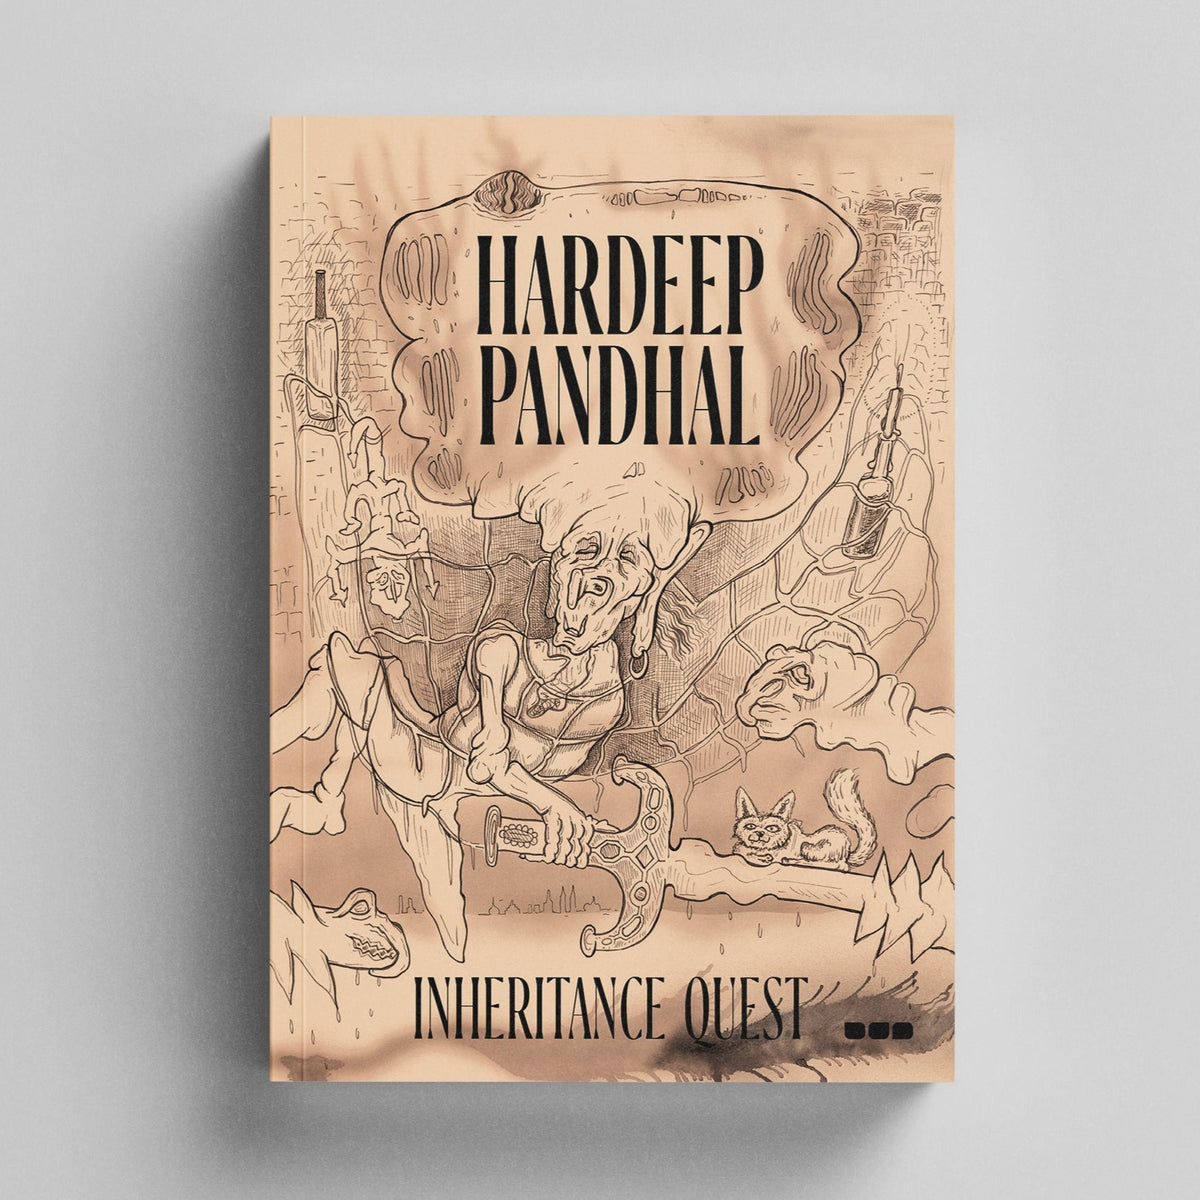 Book cover showing a drawing of an older-person figure holding a sword, surrounded by cats, with the product name "Hardeep Pandhal: Inheritance Quest" and the brand name "Black Dog Press" at the top, reflecting elements of Sikh heritage and migration.